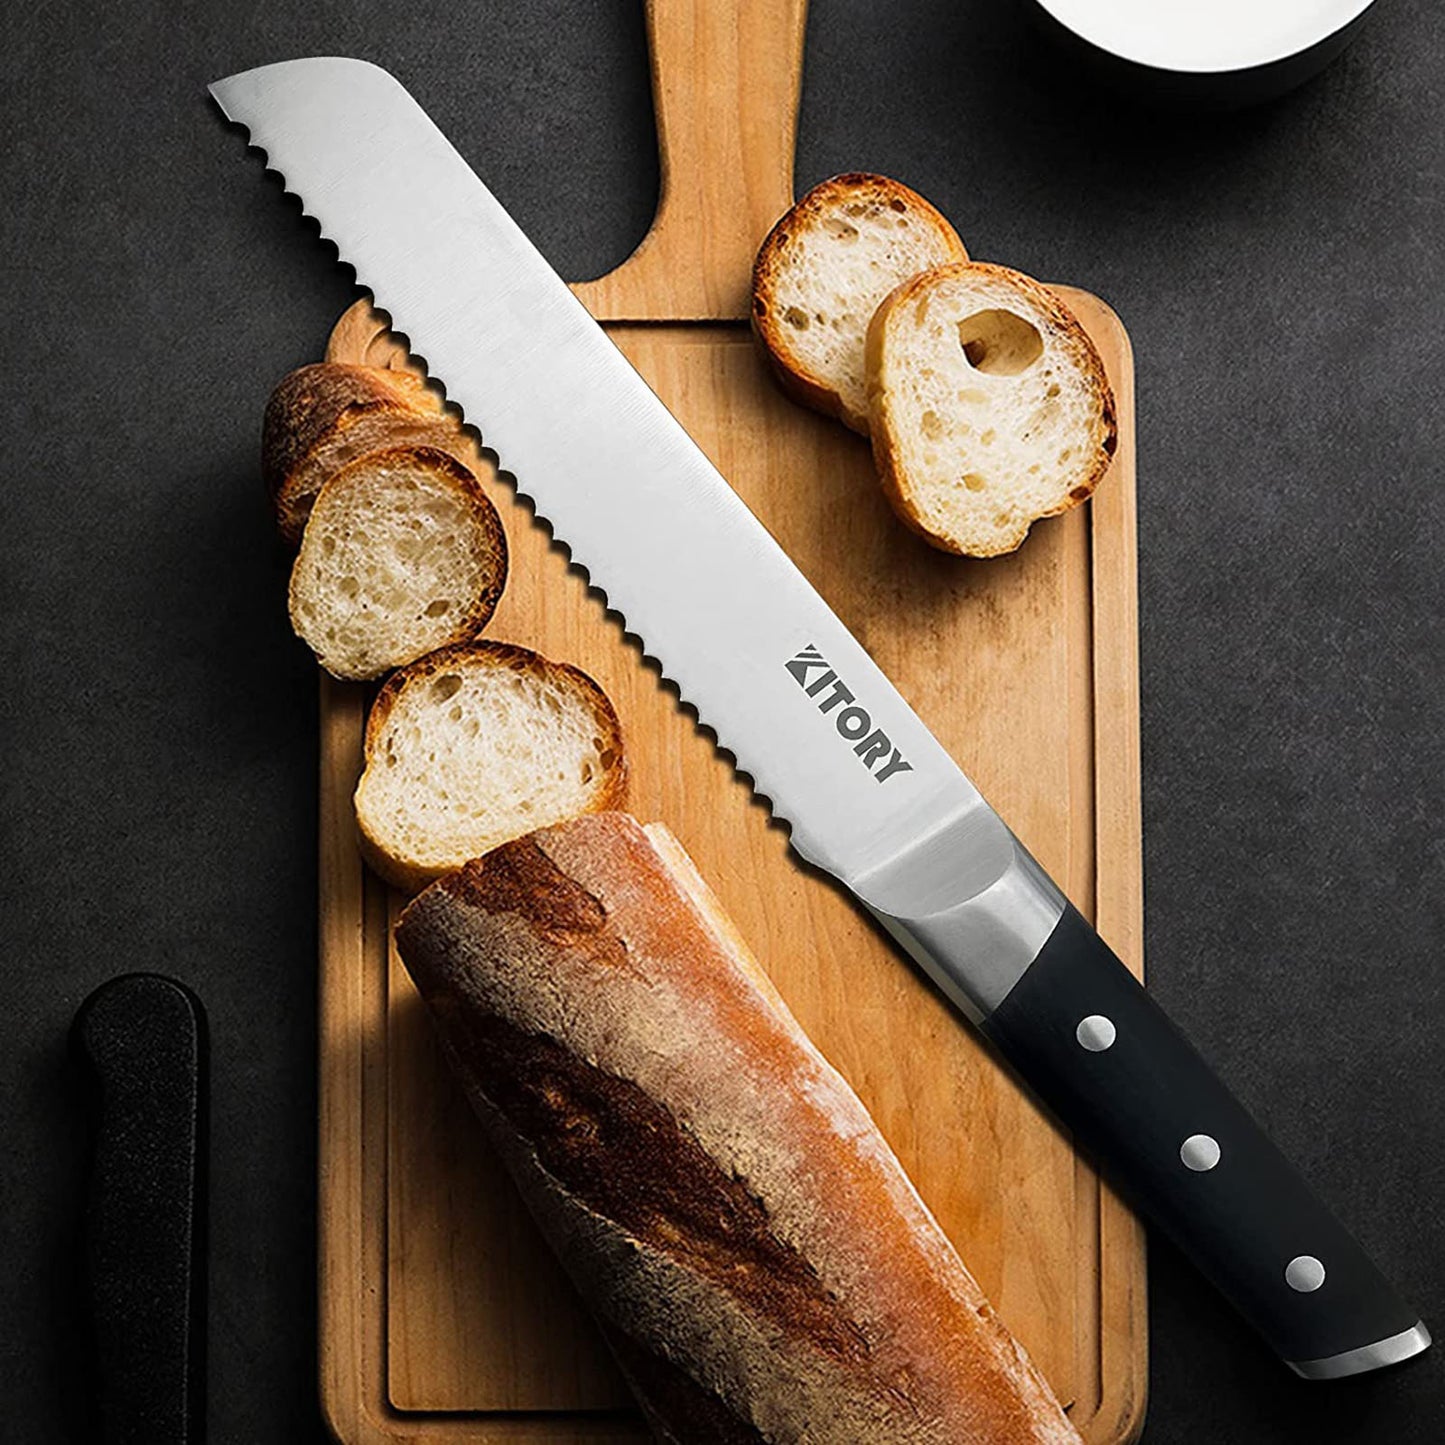 Kitory Bread Knife 8 Inch Forged German High Carbon Steel Matter Finish Handle